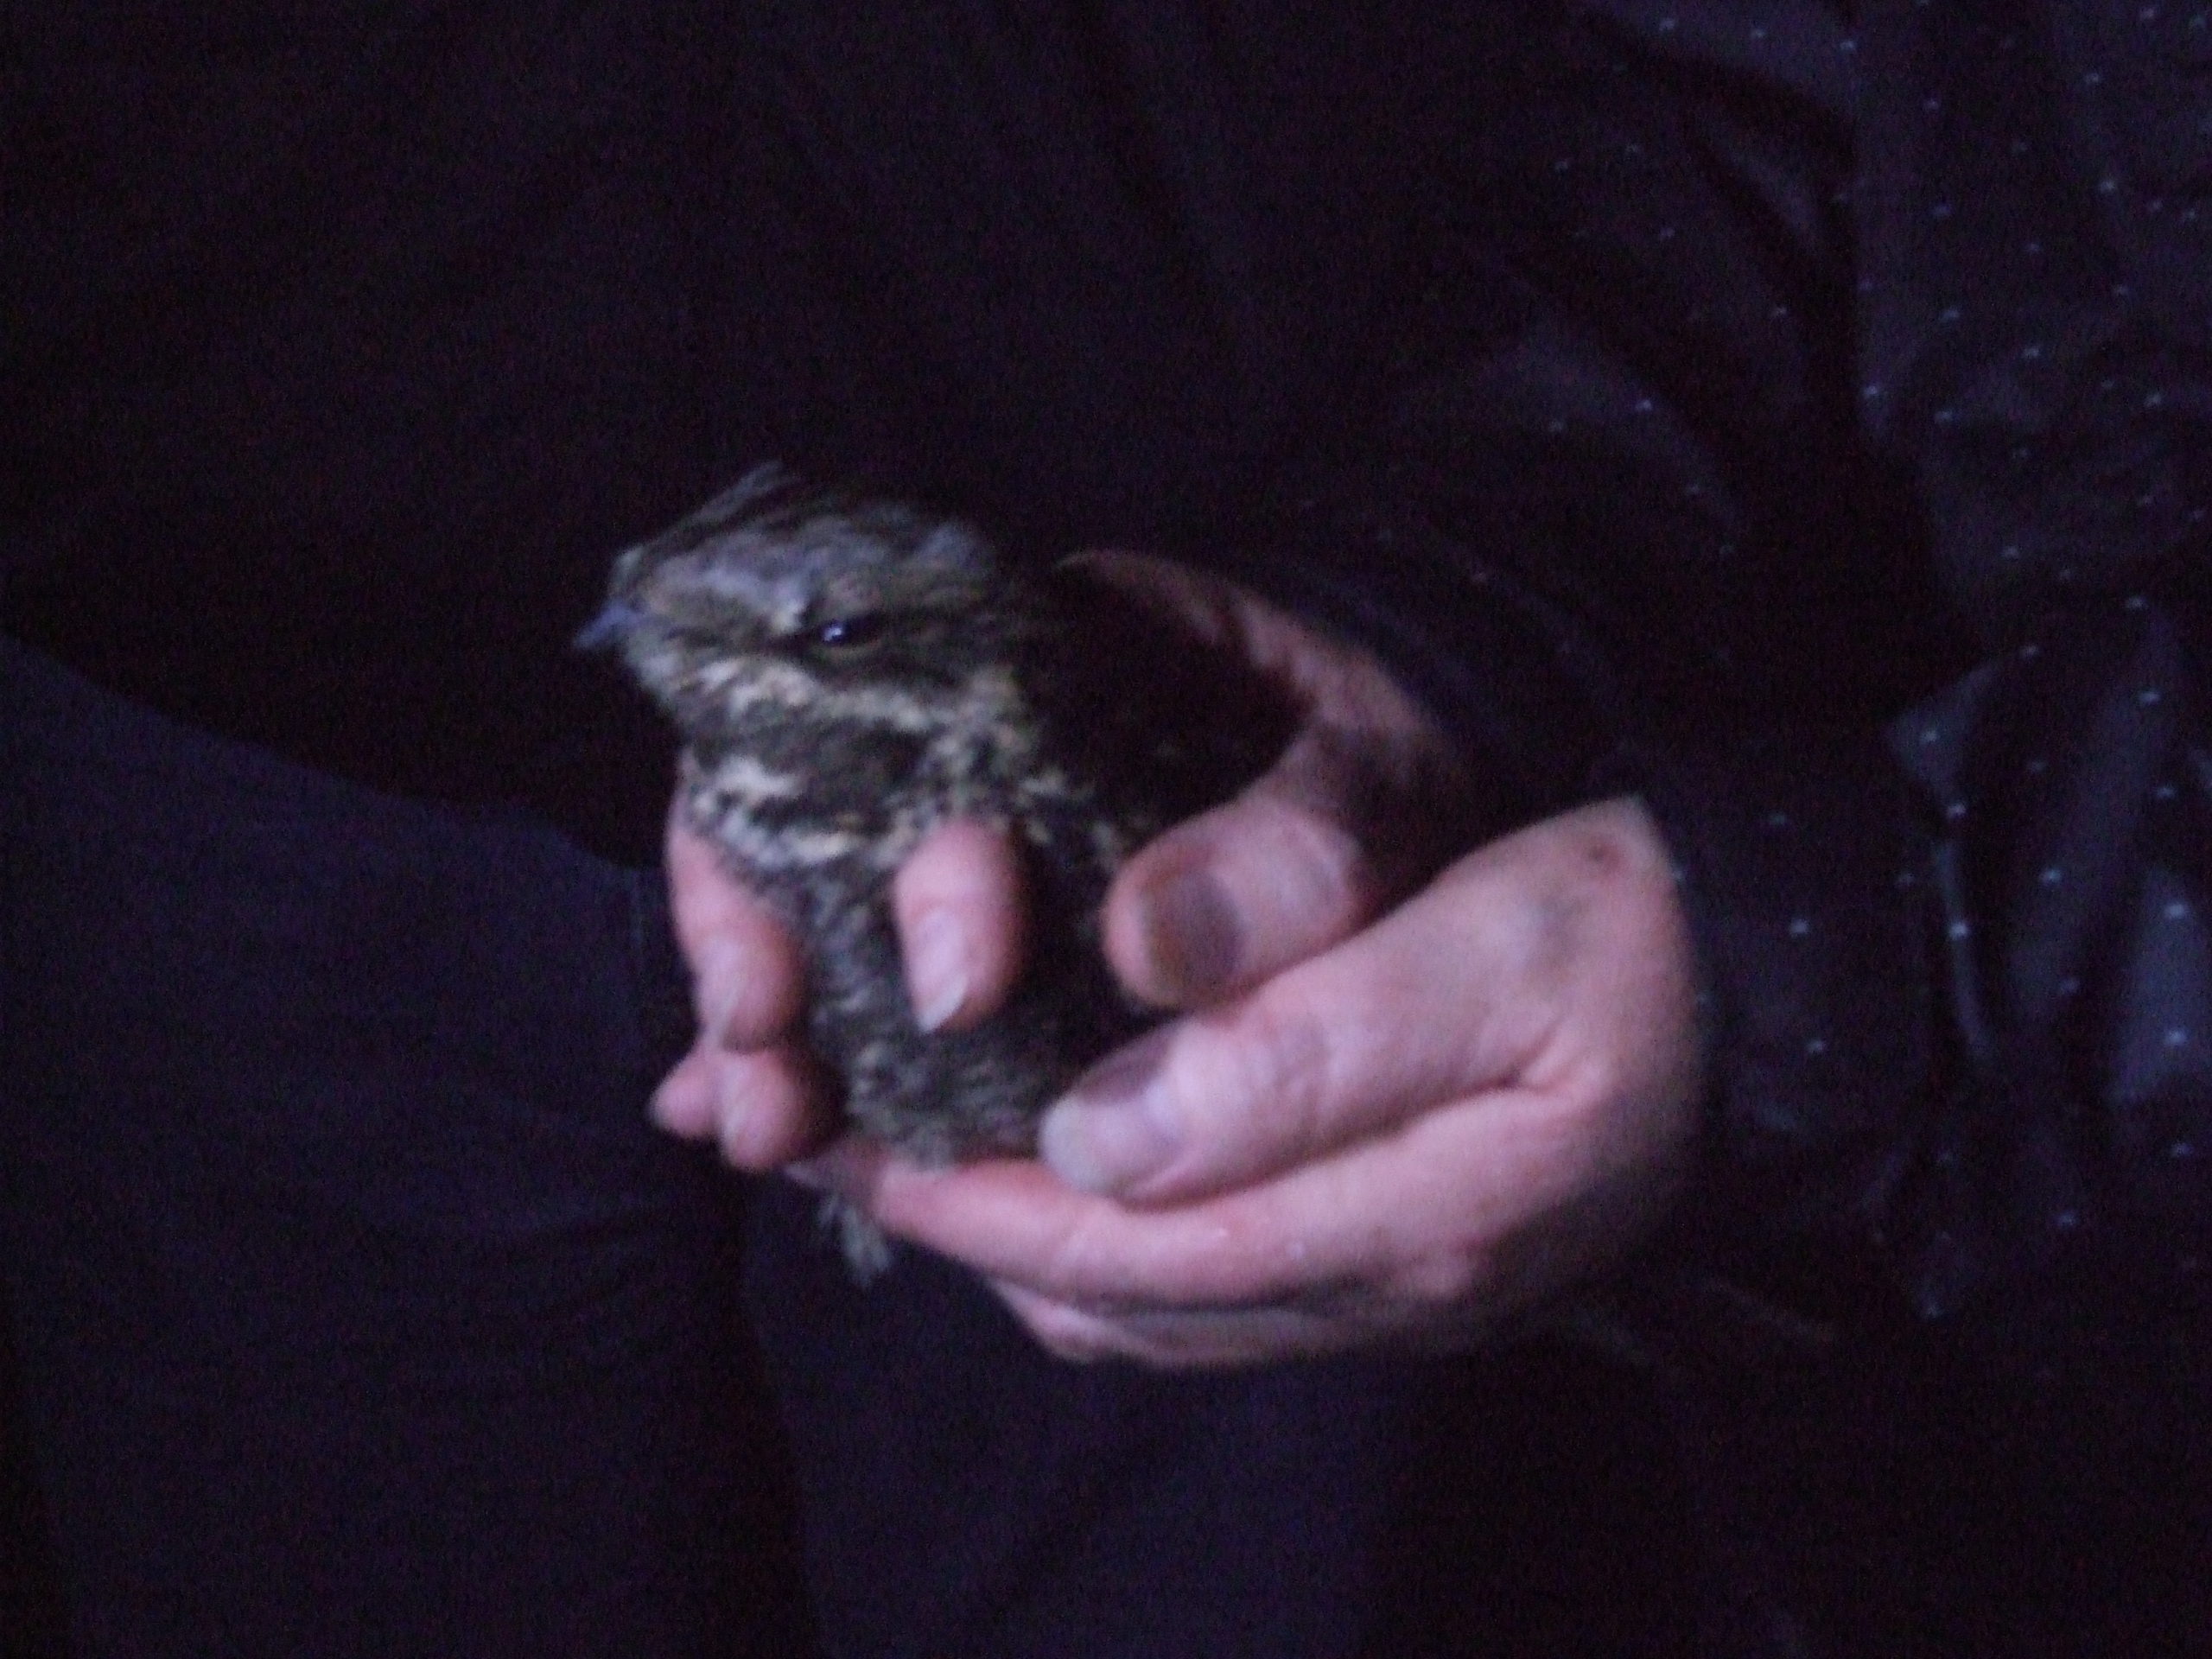 Photograph of a nightjar held in the hand during a survey